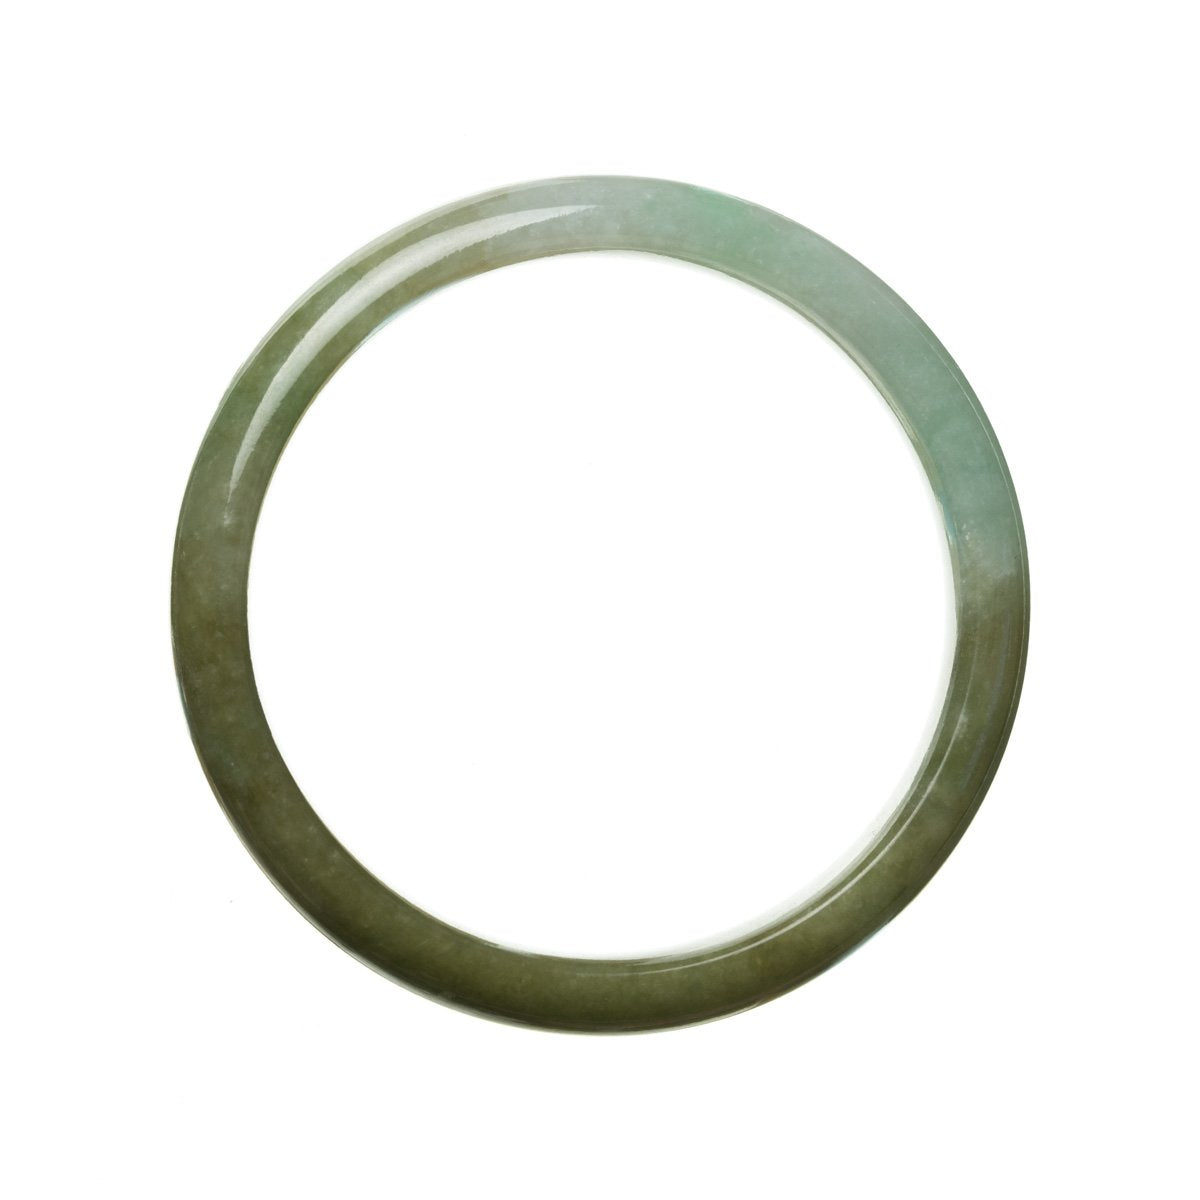 An exquisite traditional jade bangle with a beautiful green-brownish hue, made from high-quality Grade A jade. The bangle has a semi-round shape and measures 59mm in diameter. Crafted with expert precision by MAYS™.